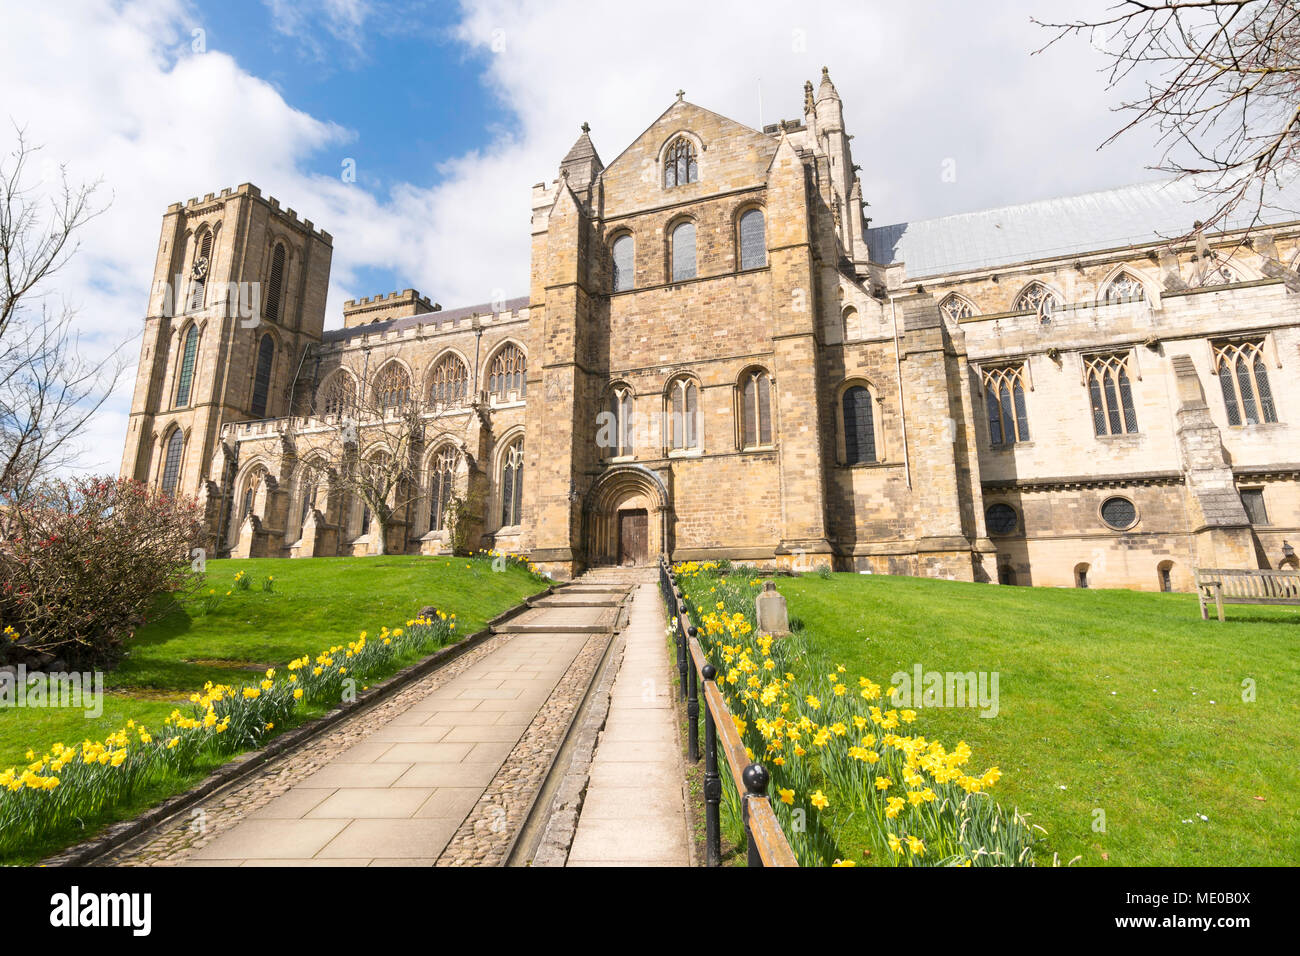 Daffodils in bloom outside the south facade of Ripon cathedral or Minster, Ripon, North Yorkshire, England, UKd Stock Photo